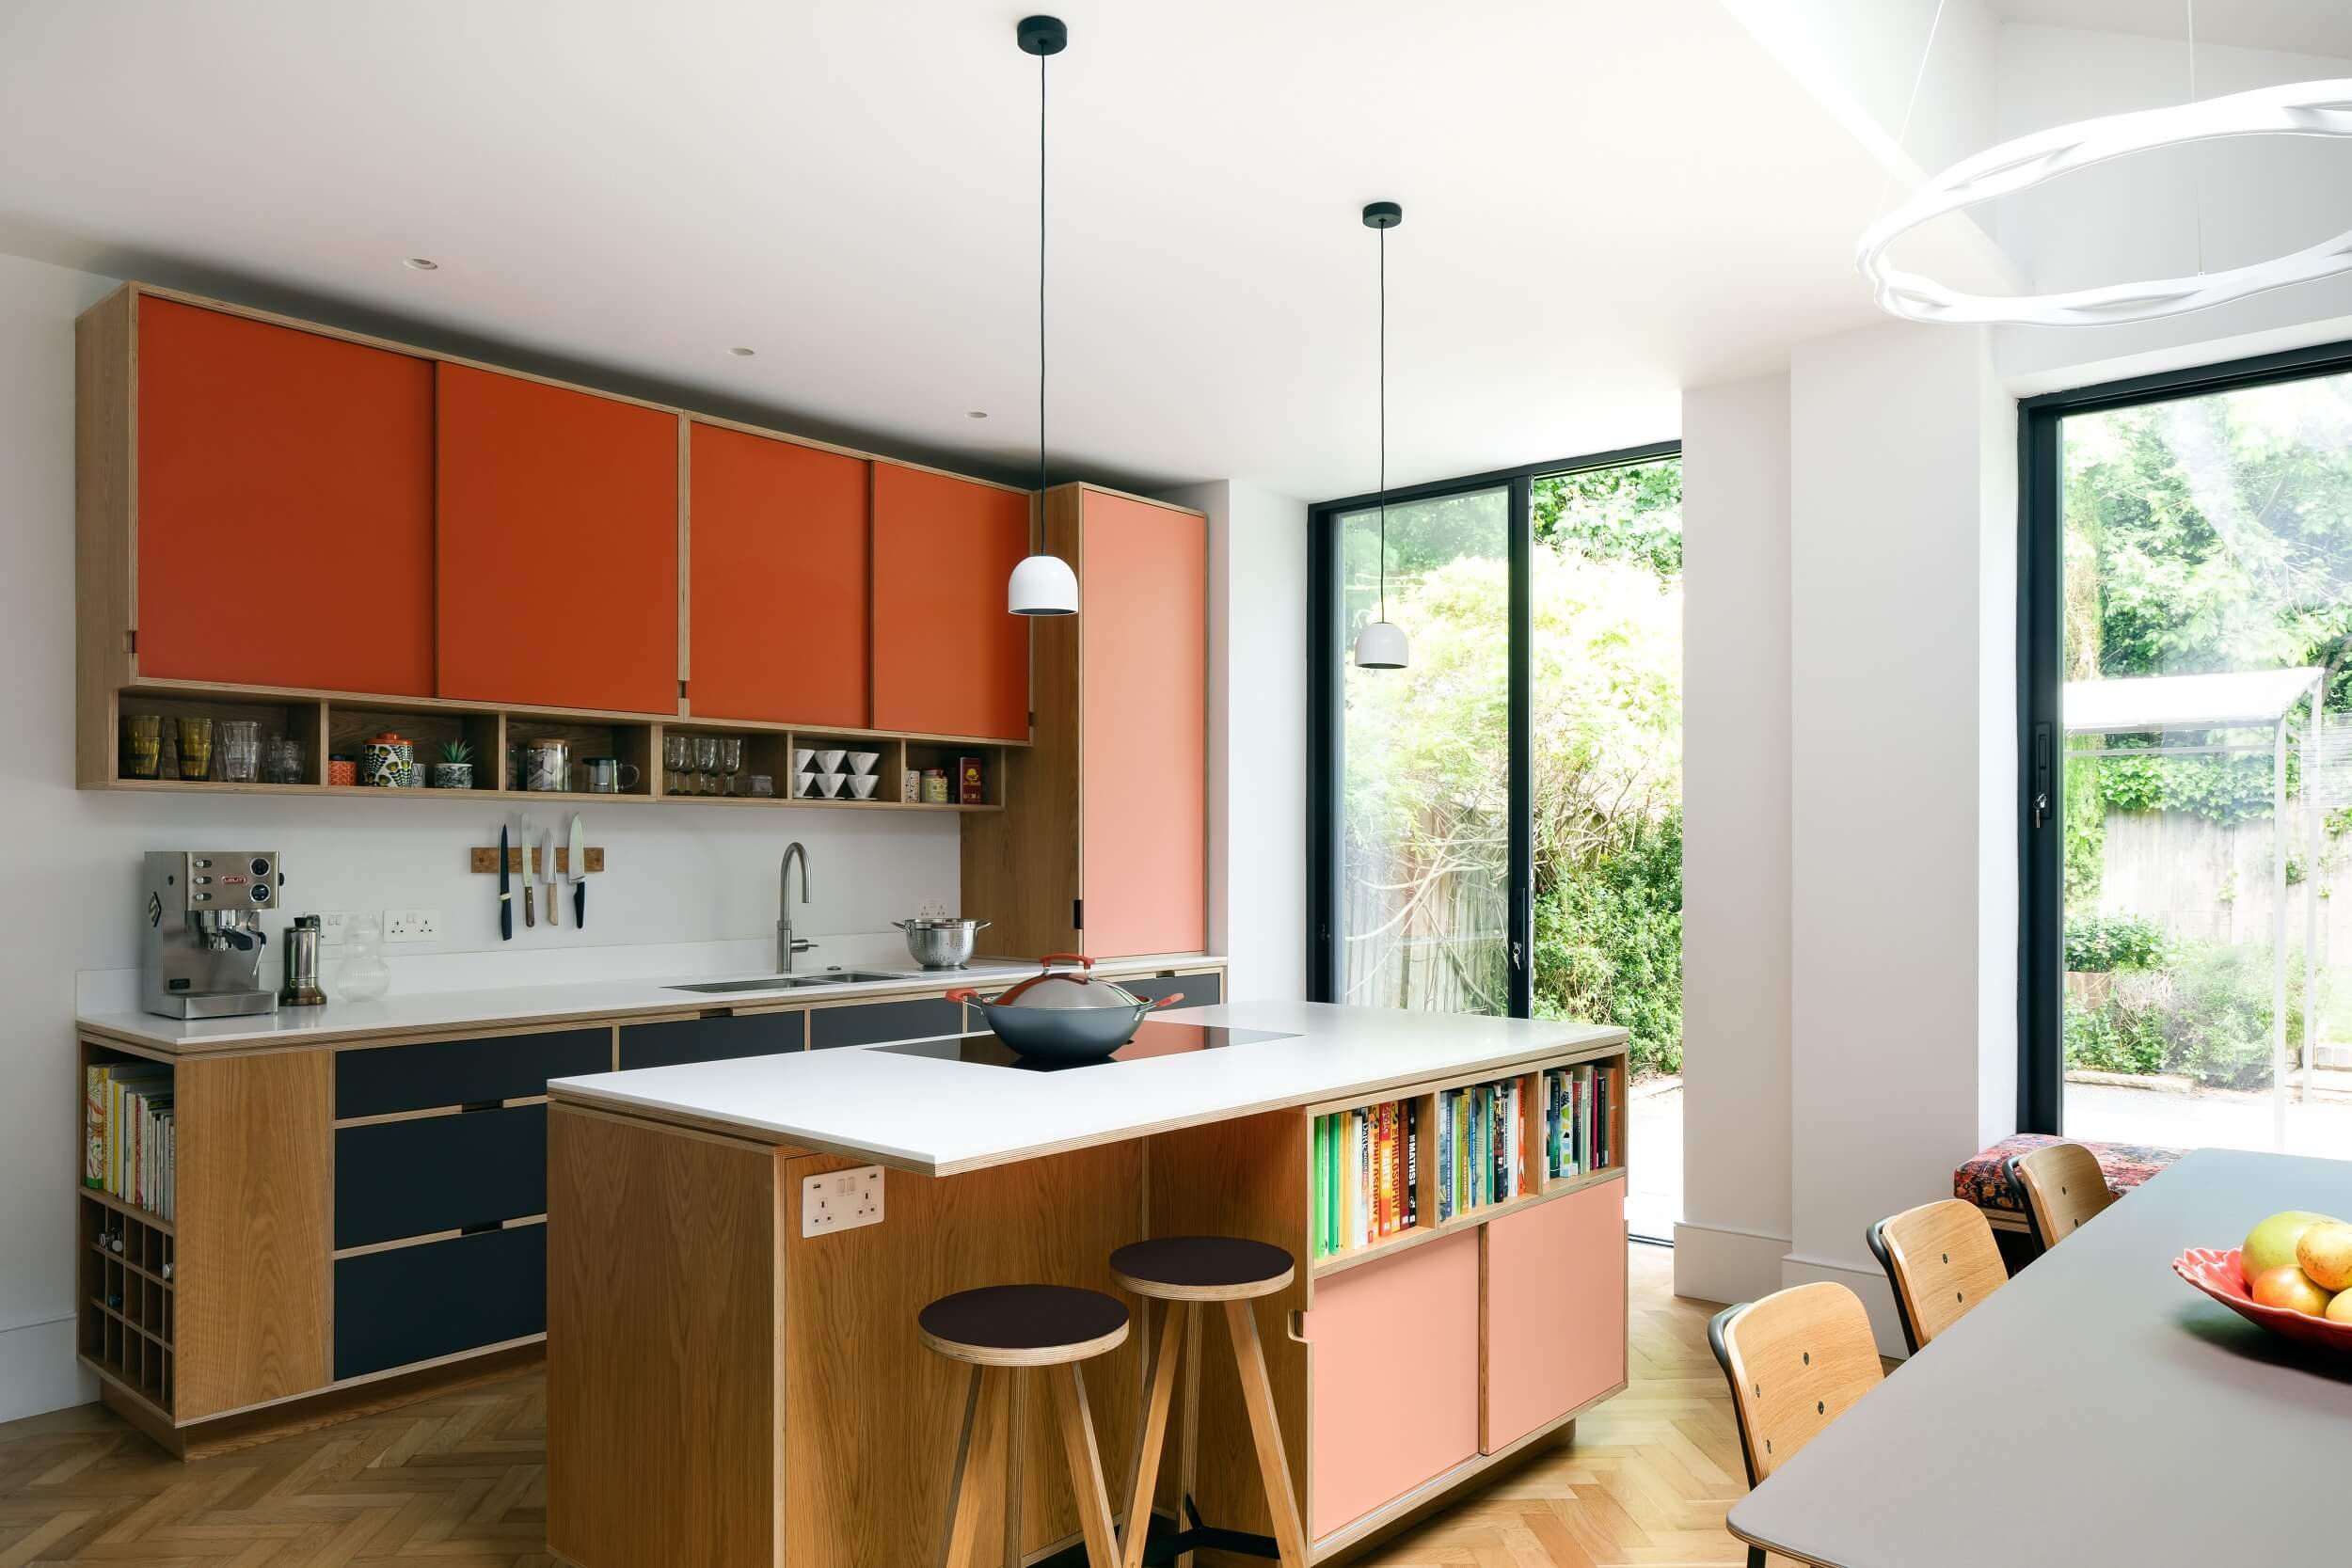 Stoke+Newington+Plywood+Kitchen+and+Cabinetry+2.jpg